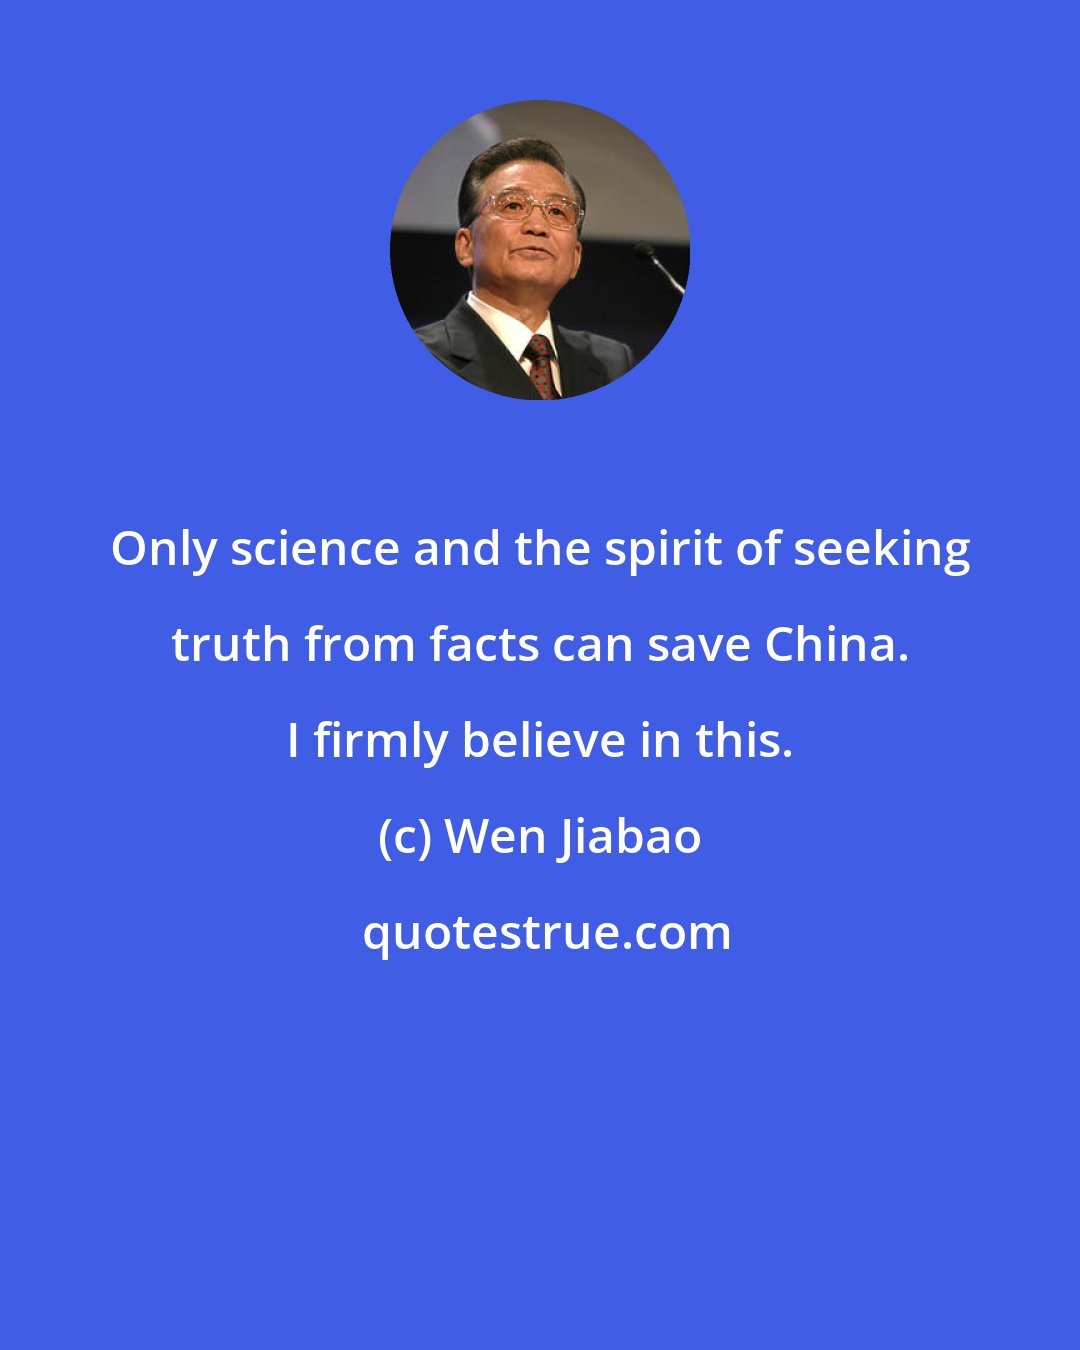 Wen Jiabao: Only science and the spirit of seeking truth from facts can save China. I firmly believe in this.